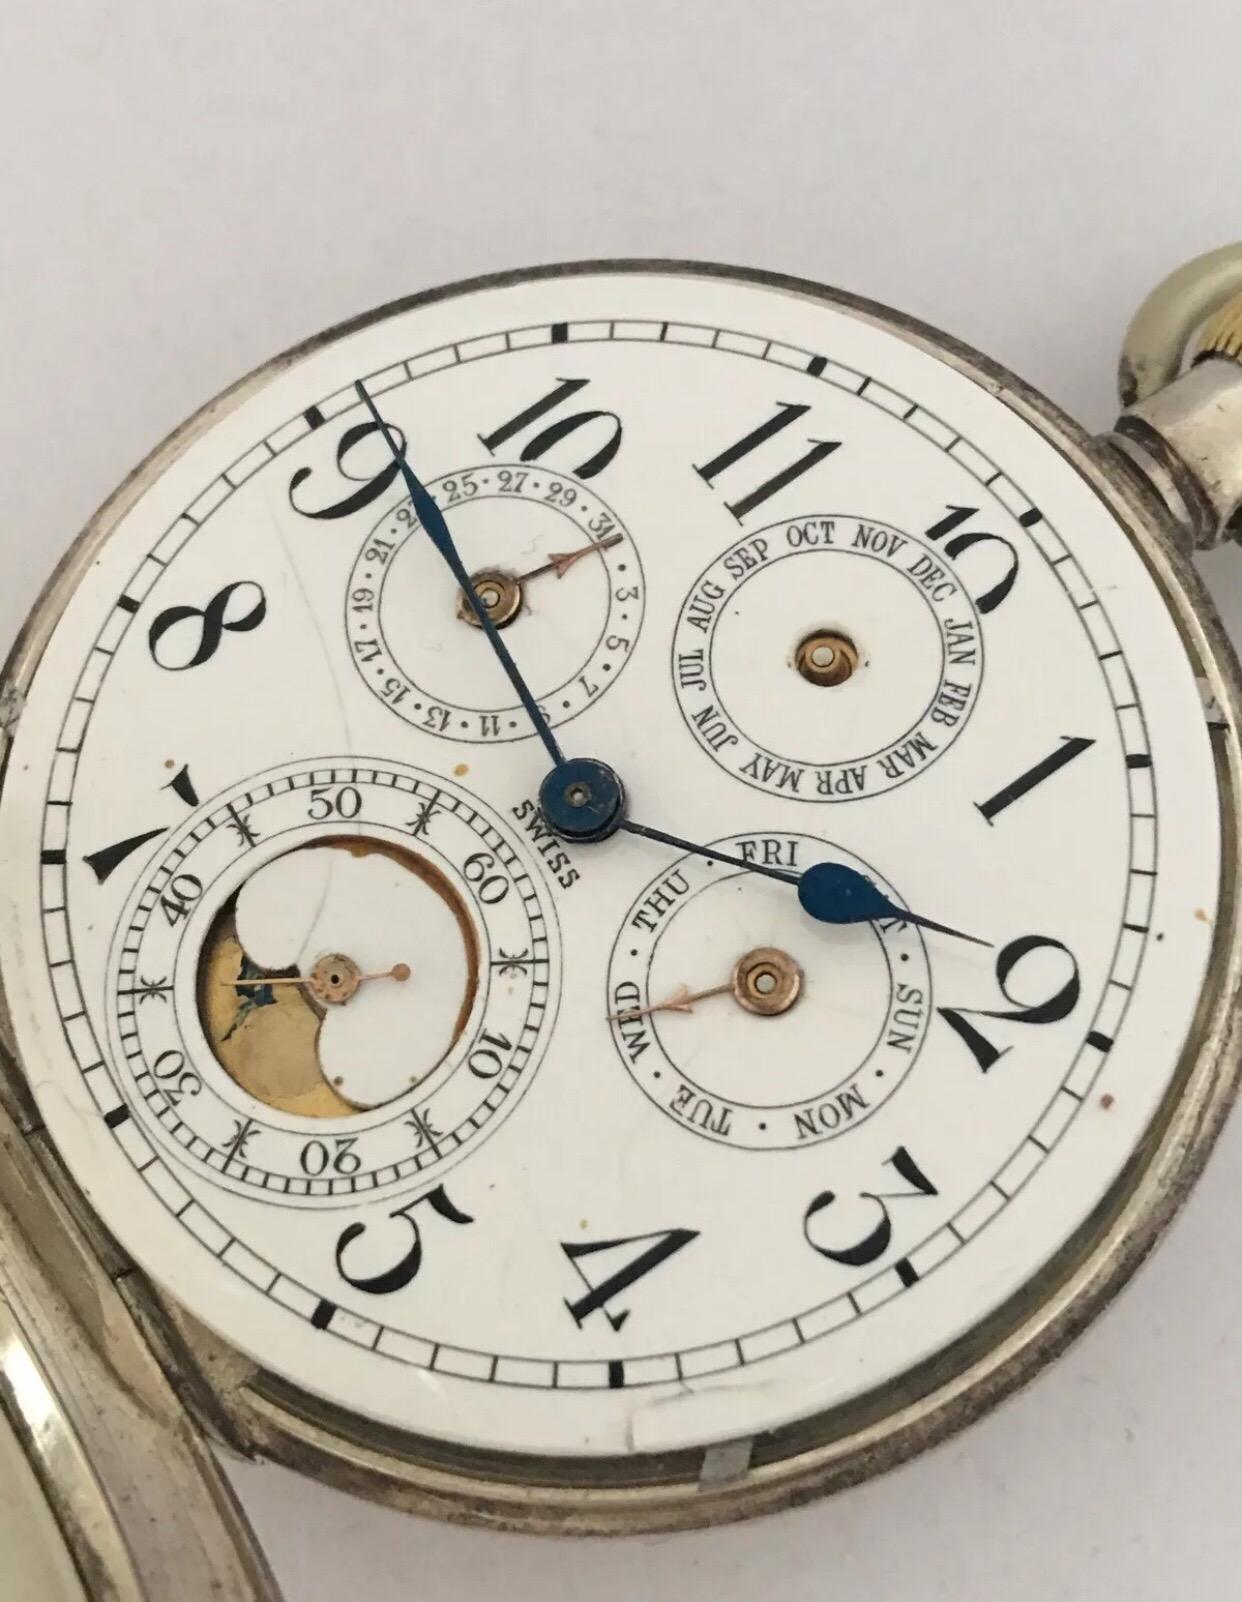 
Antique Silver Swiss moon-phase Calendar Pocket Watch.


This watch is working and ticking nicely. There is a hairline crack on the dial, glass scratches and cloudy. And a bit bend on the back case cover as shown on the photos. Months hand missing.